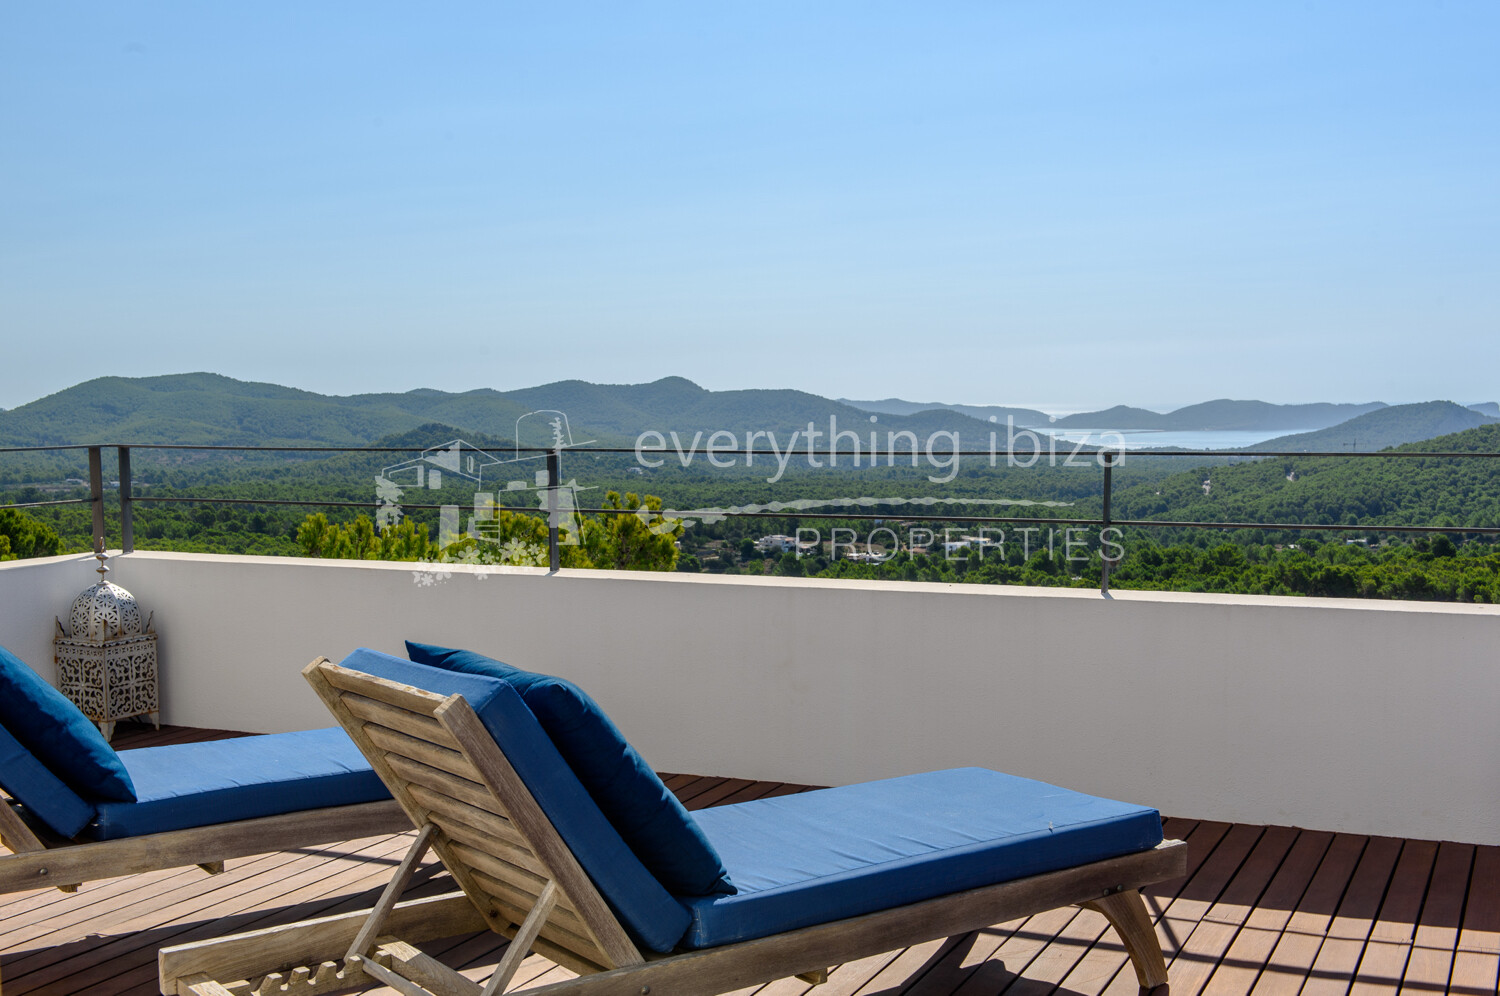 Spacious Villa with Elevated Sea Views Es Cubells, ref.1650, for sale in Ibiza by everything ibiza Properties